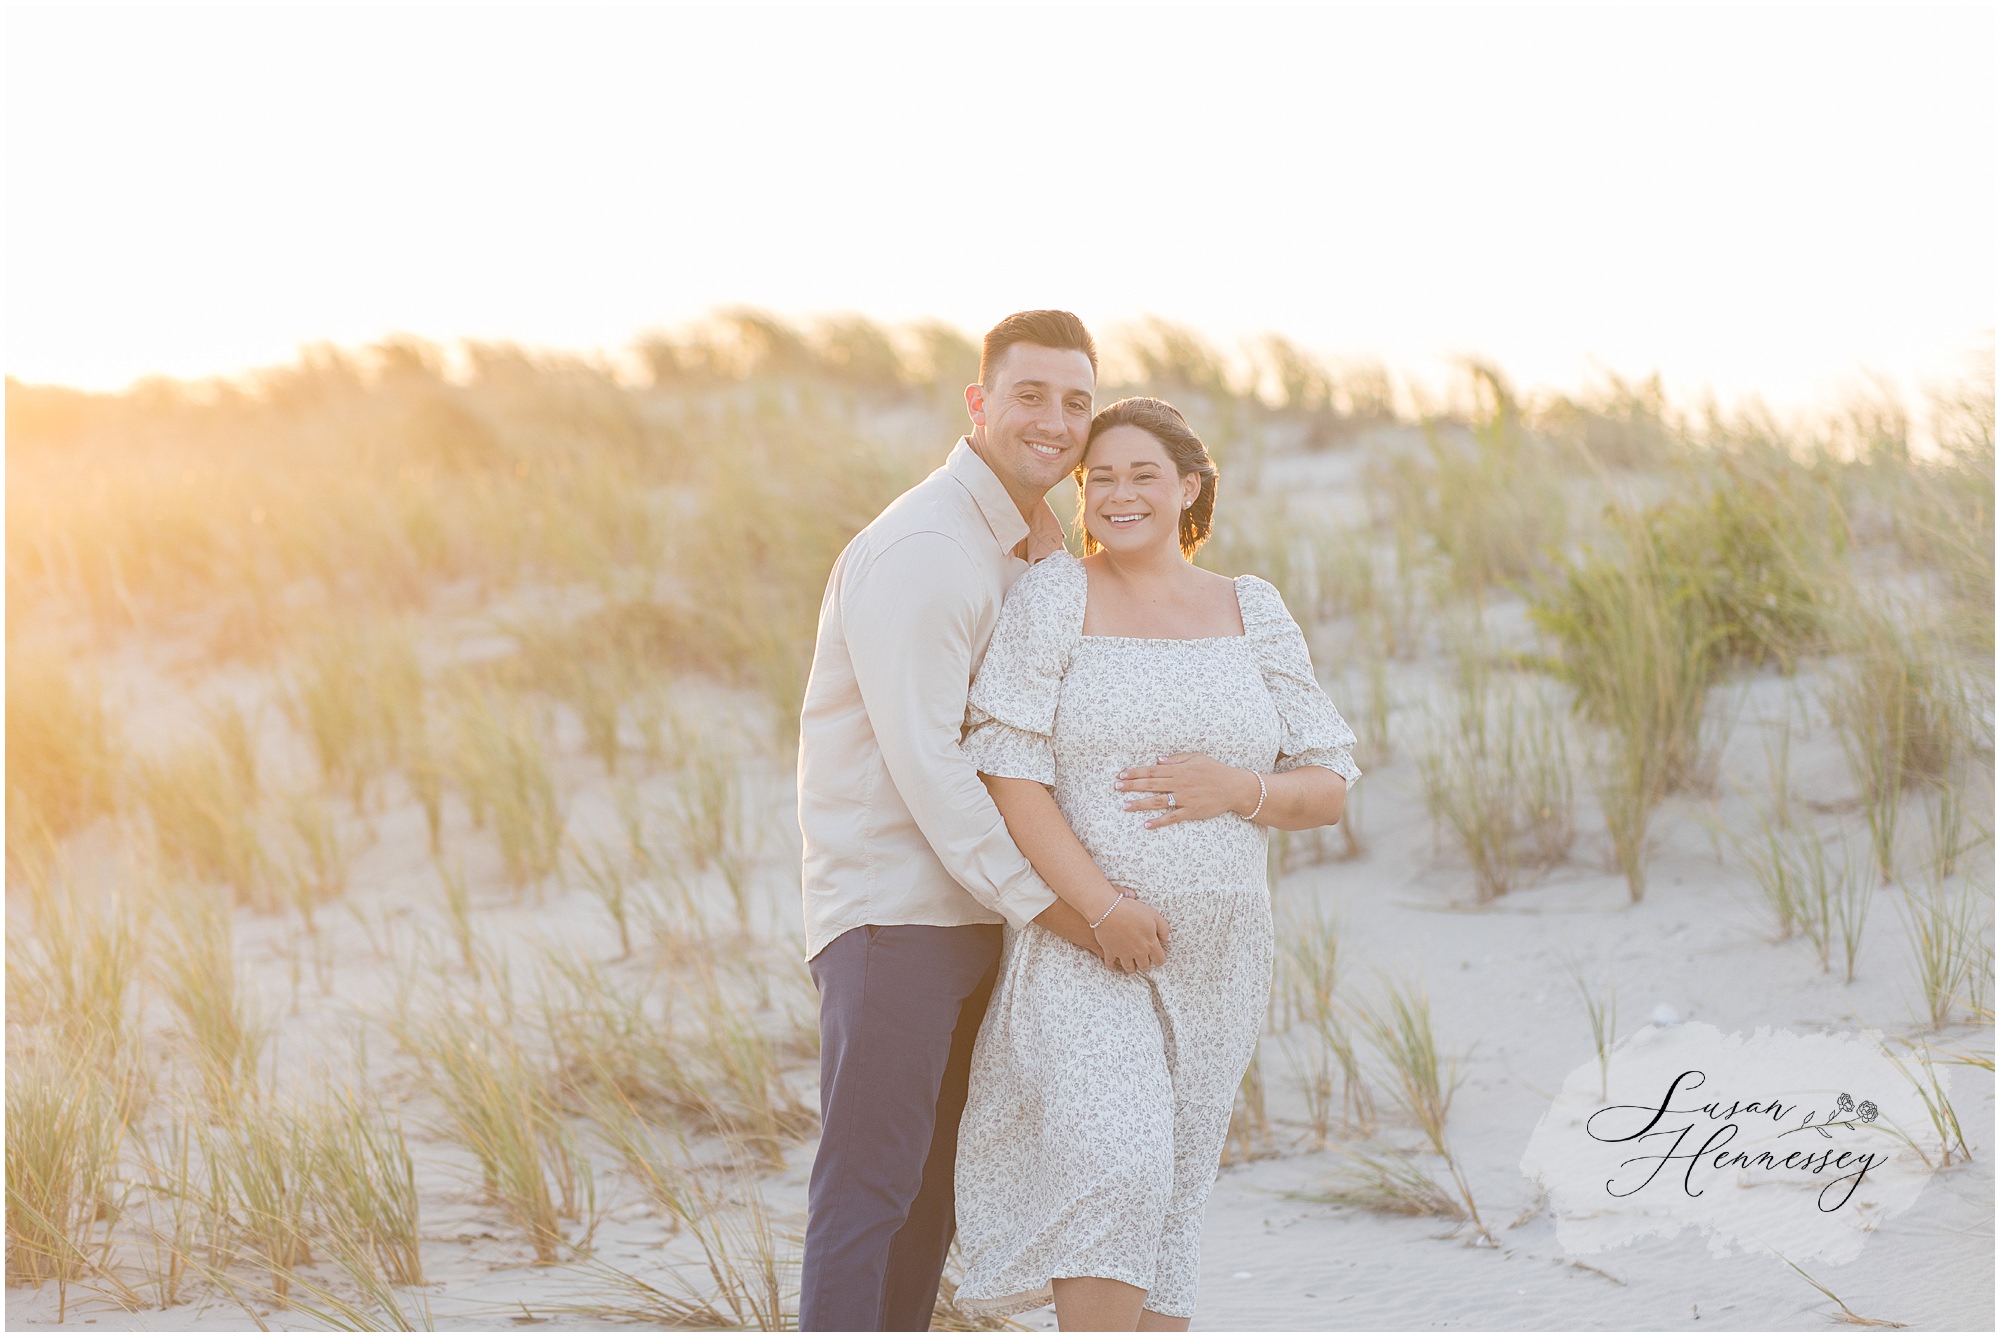 Sunset maternity session at the Jersey Shore